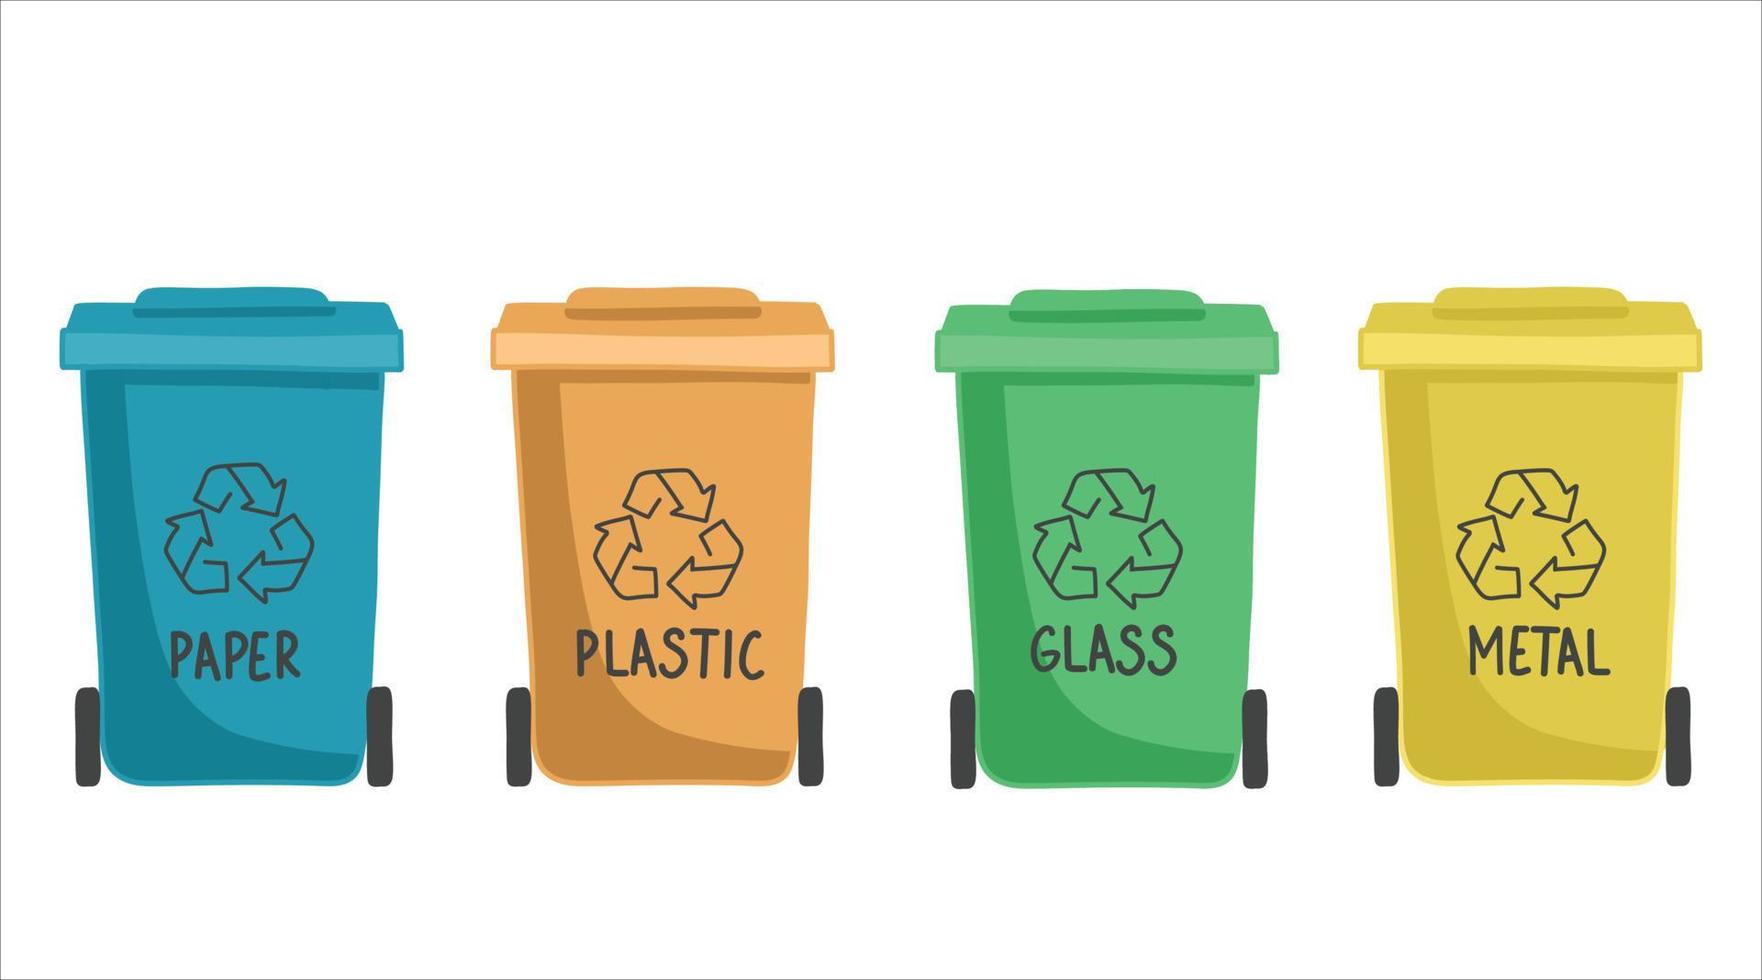 Containers or recycle bins for paper, plastic, glass and metal trash. Concept of separate garbage collection. Dumpsters of different colors isolated on white background. Flat vector illustration